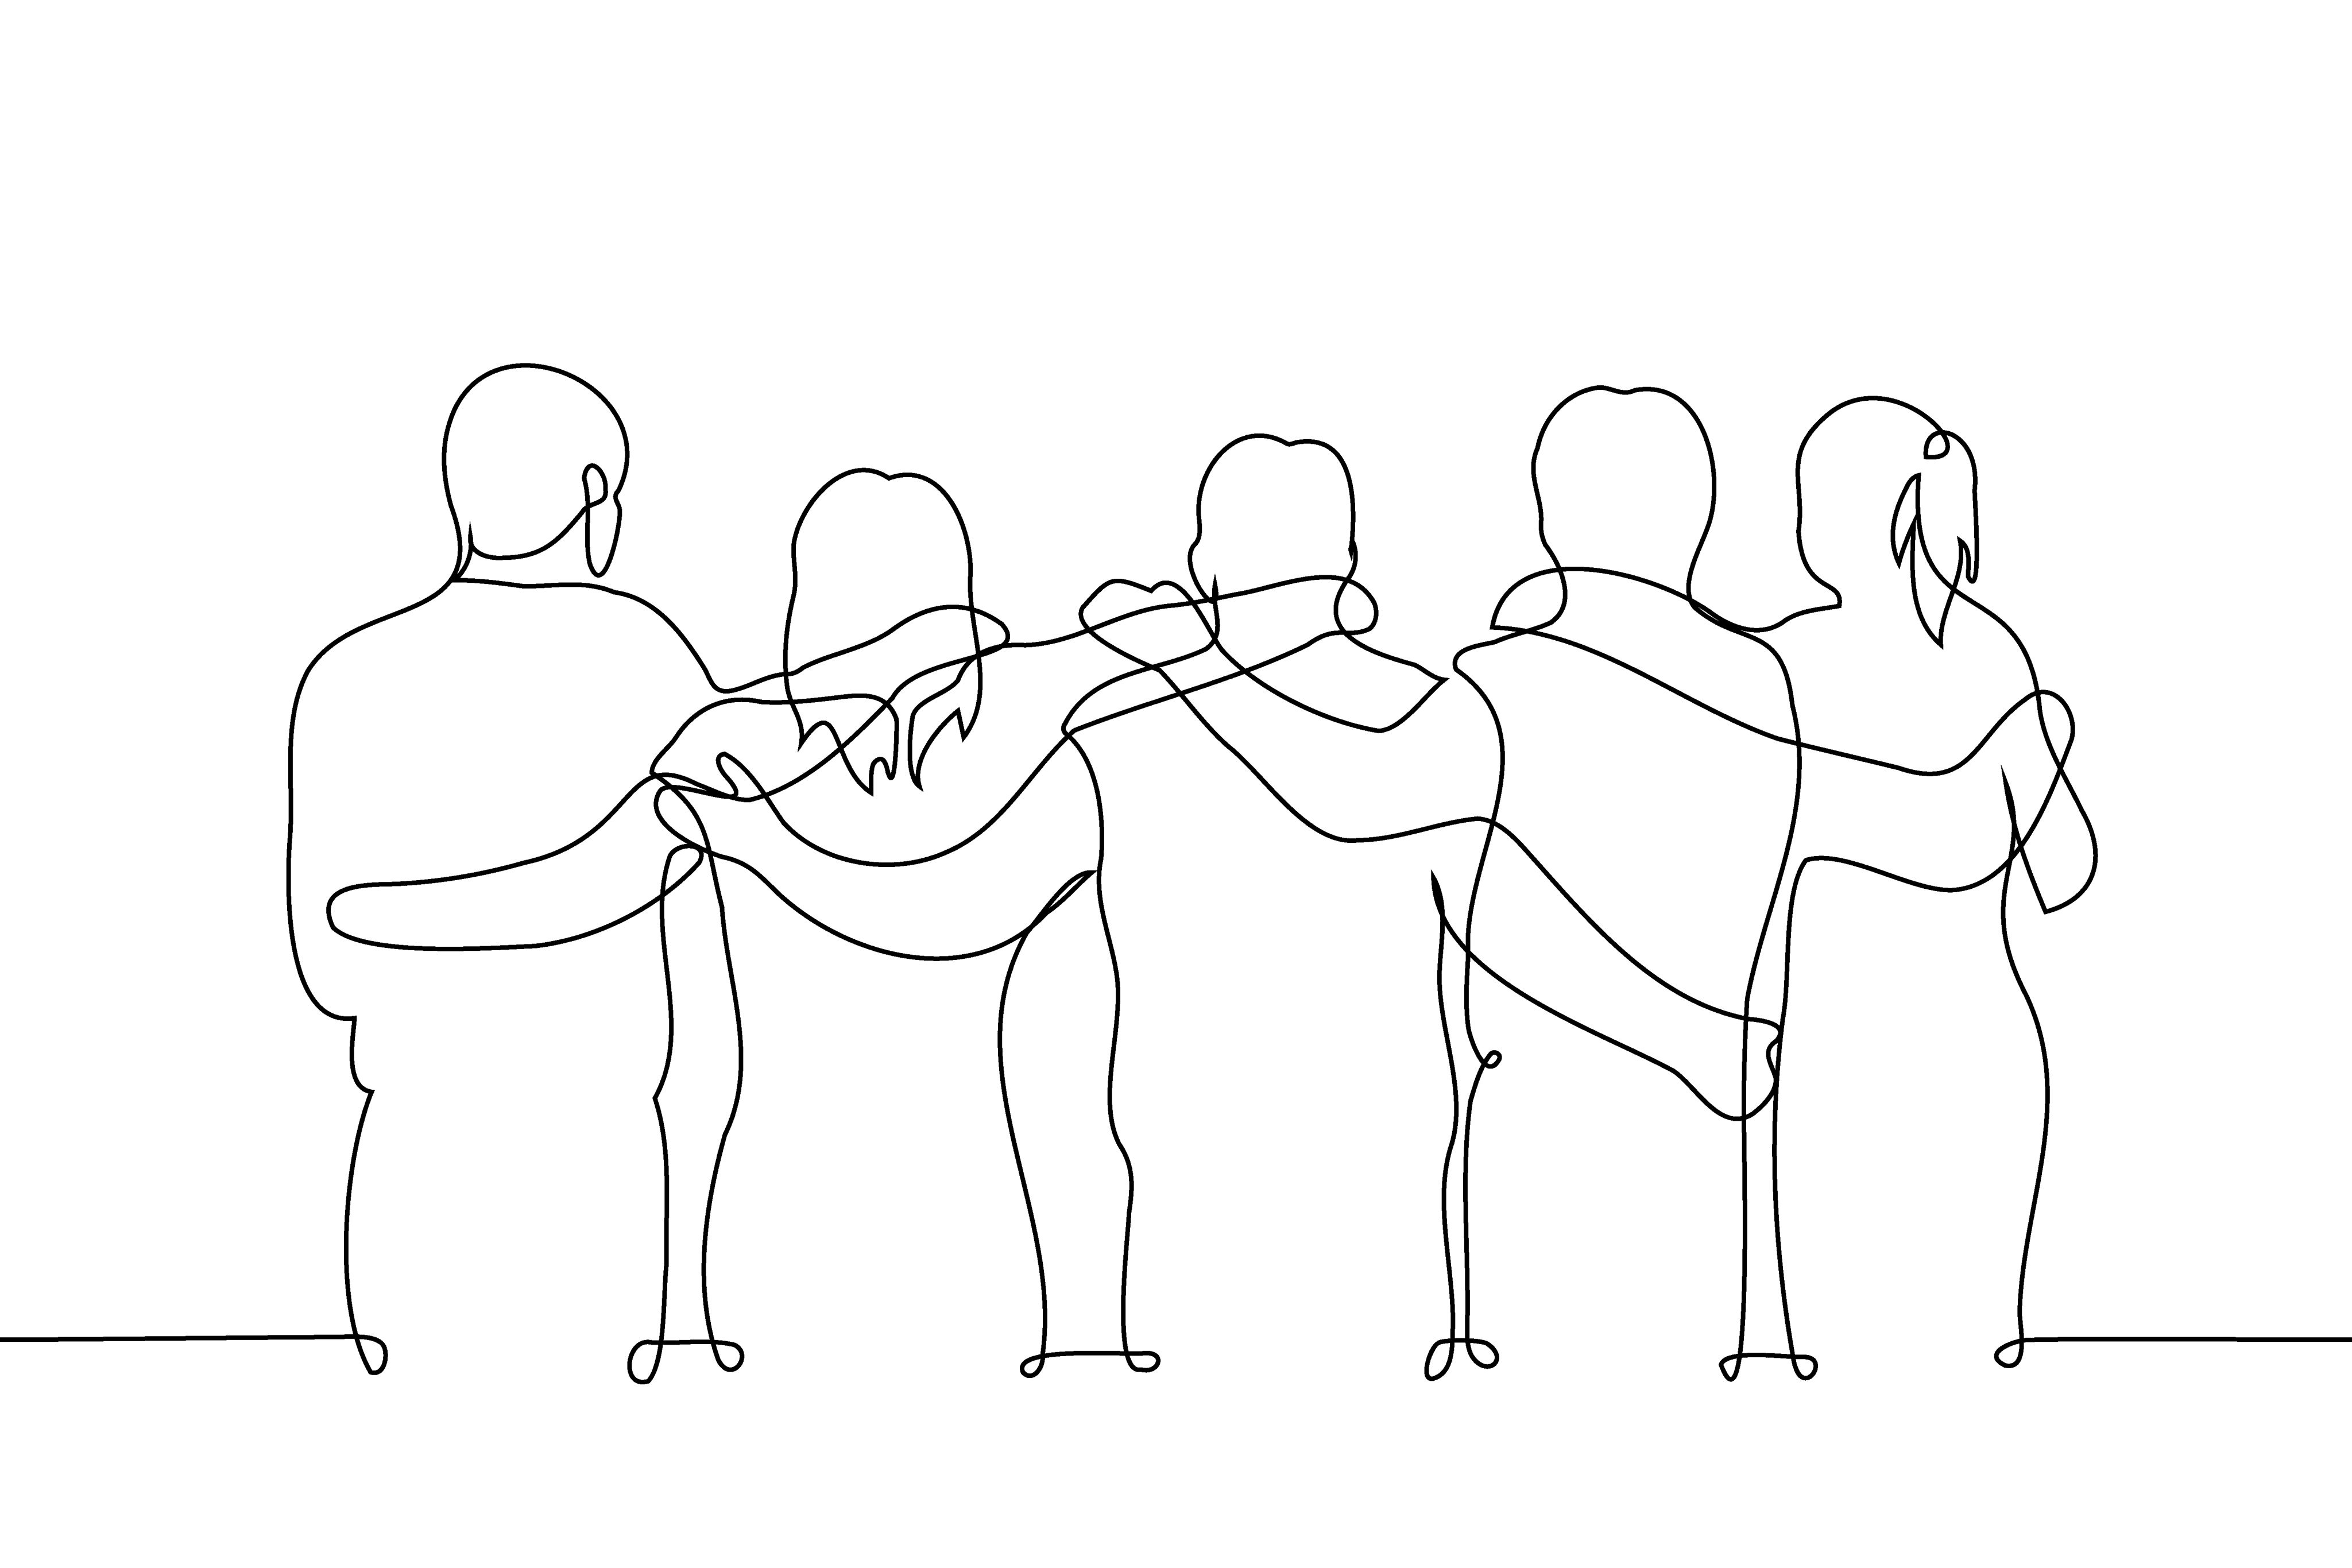 Line drawing of a group of people in a line with arms around each other